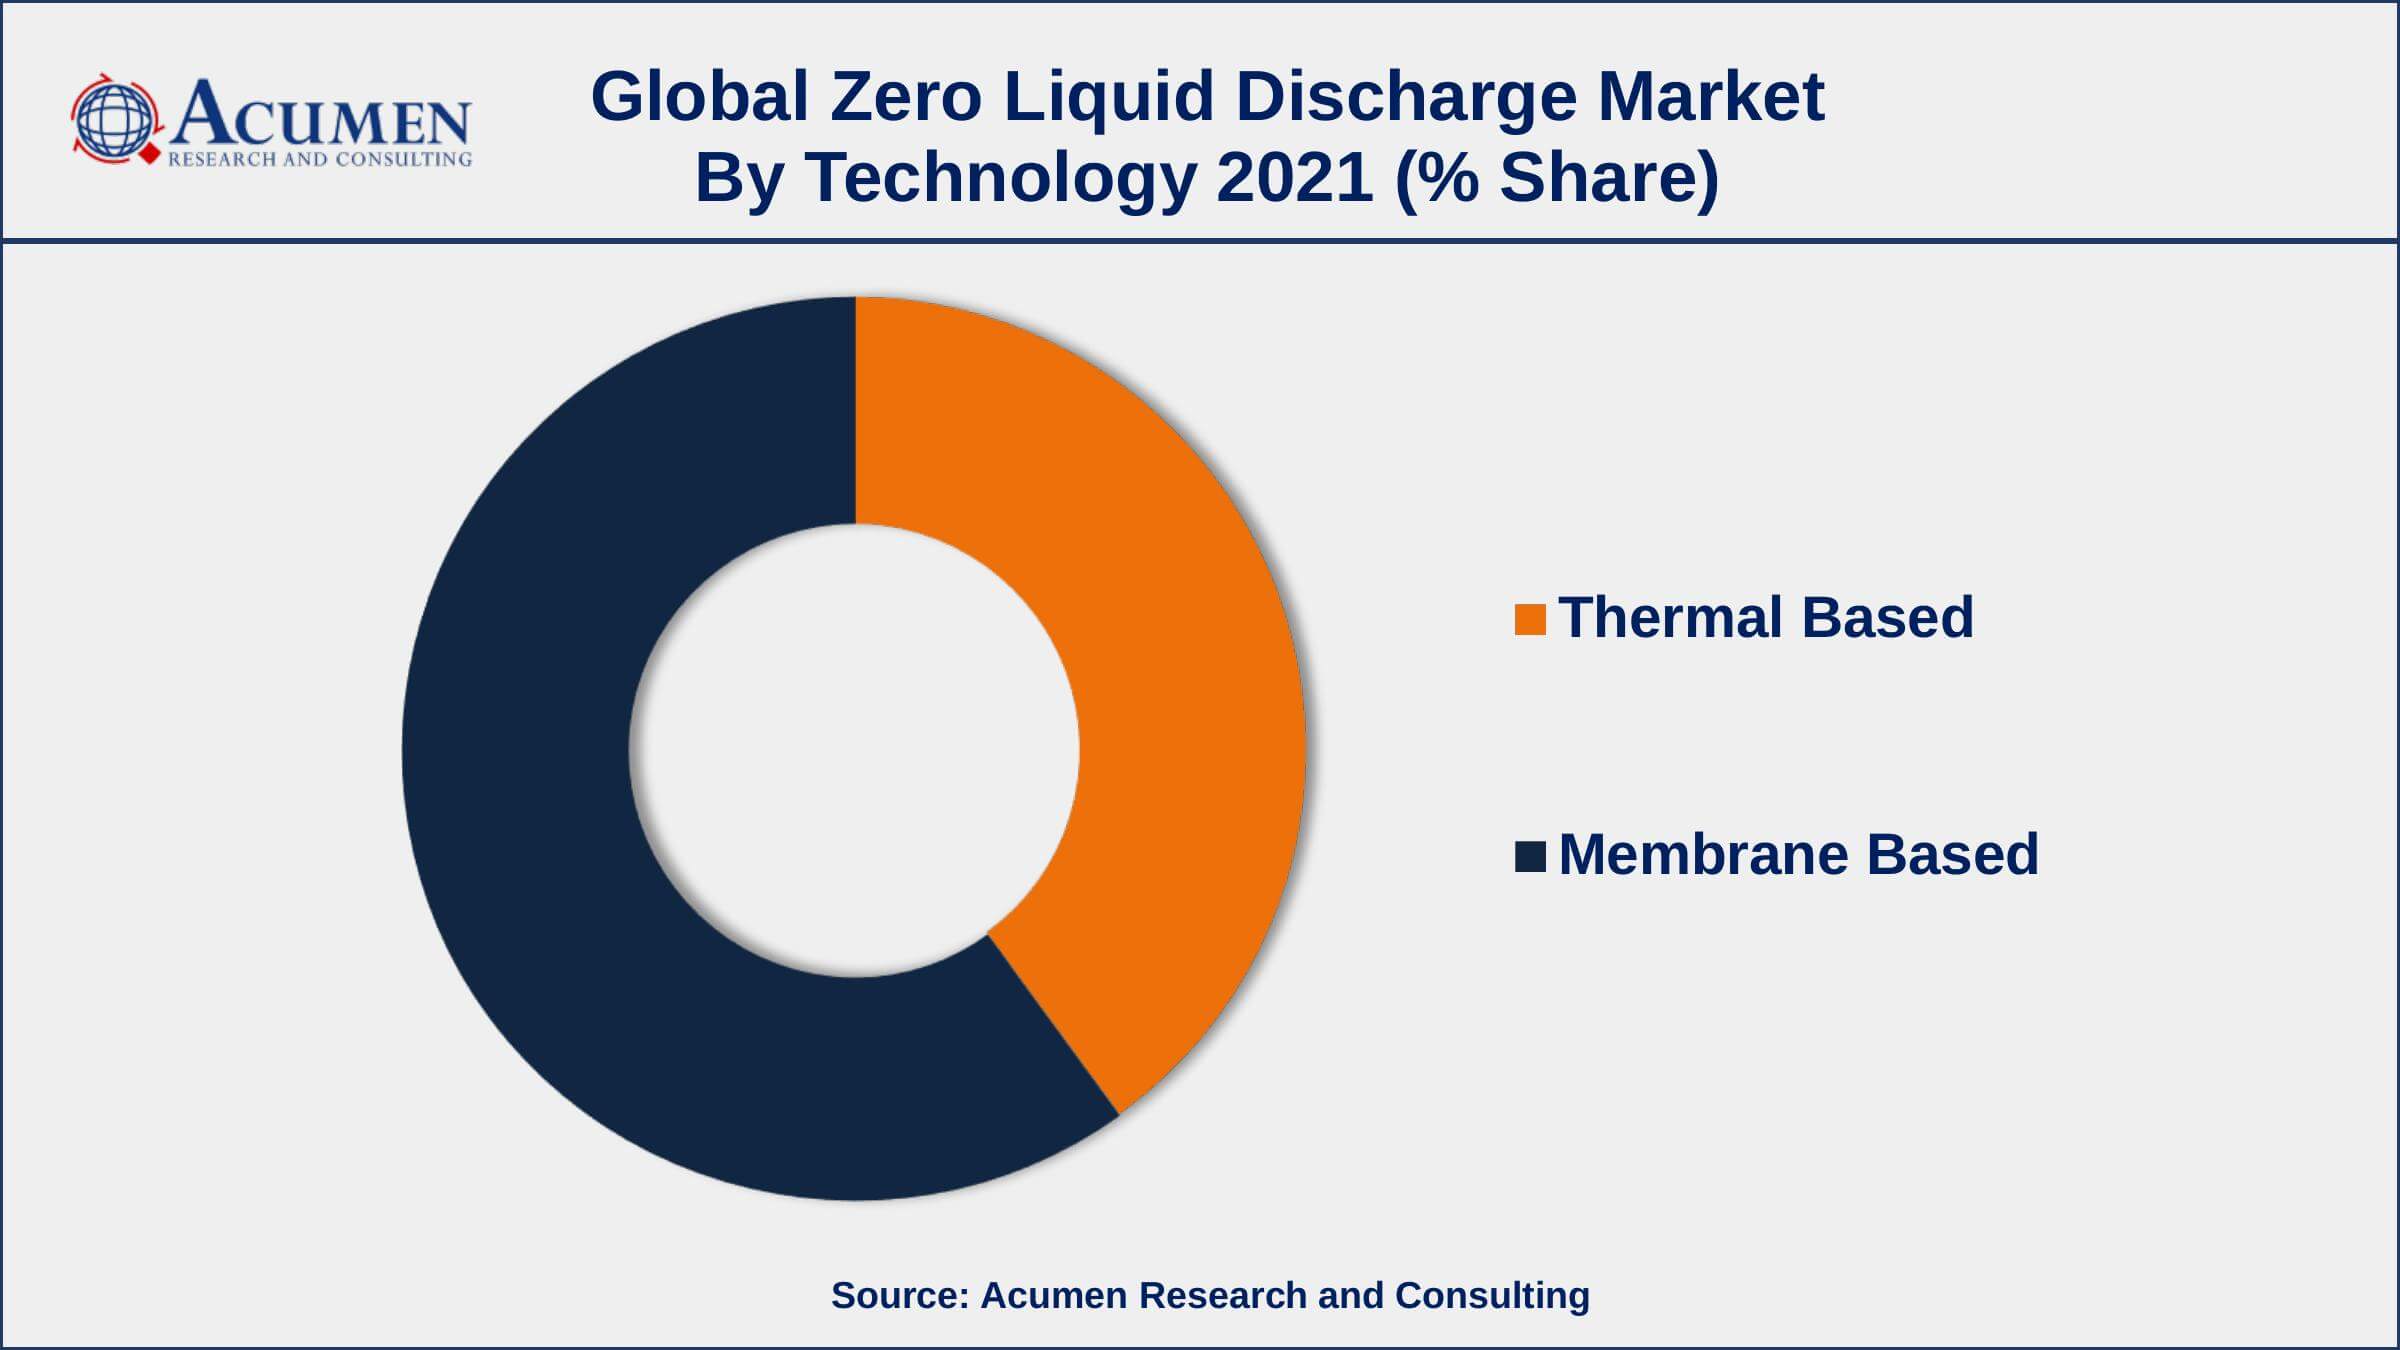 Based on technology, membrane-based segment accounted for over 58% of the overall market share in 2021